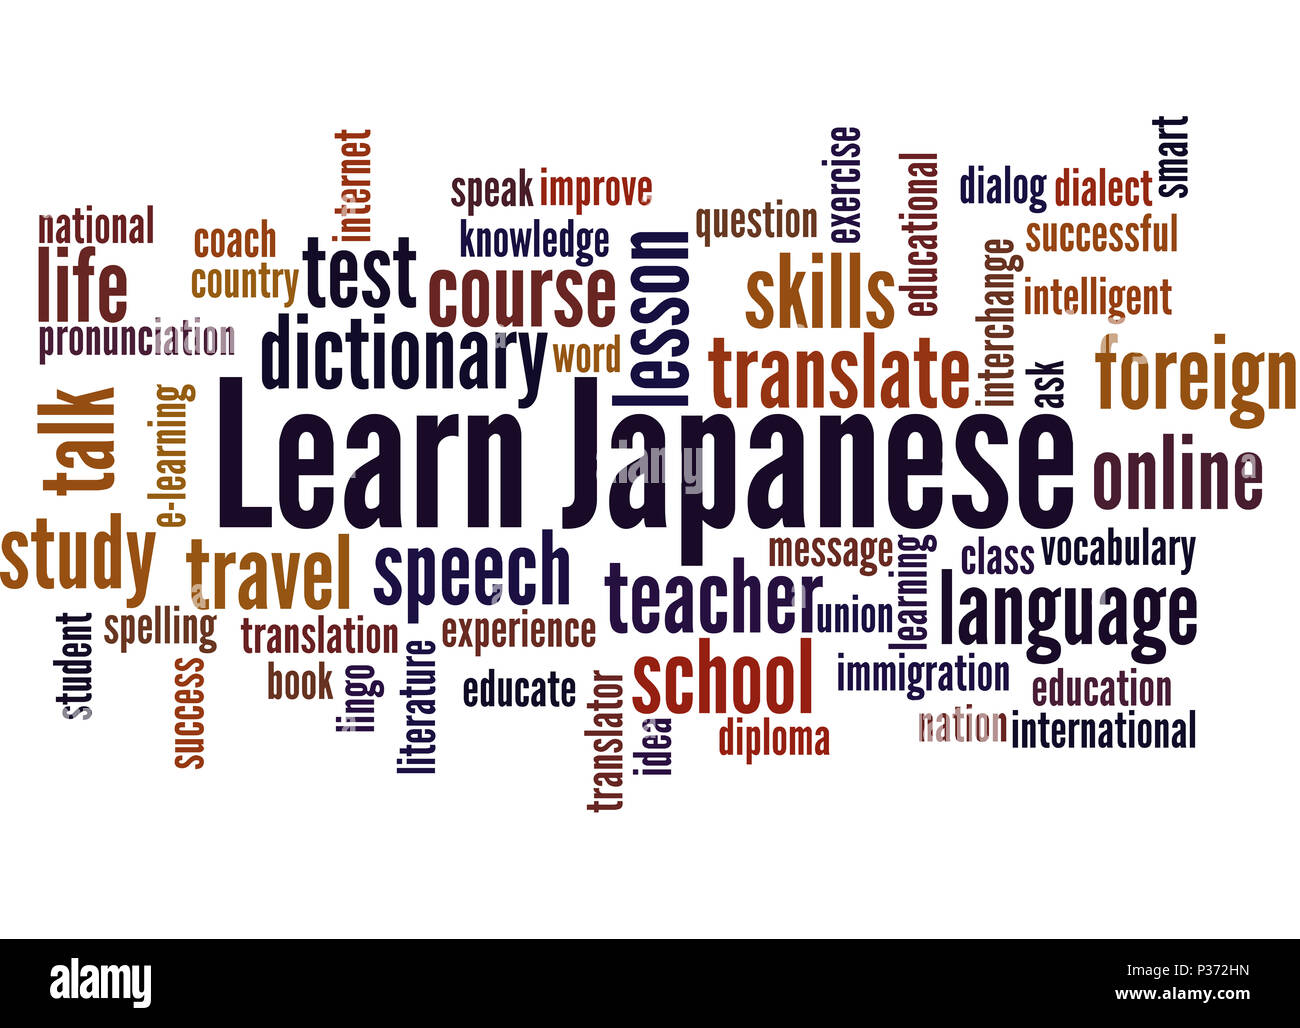 Books for learning the Japanese language Stock Photo - Alamy